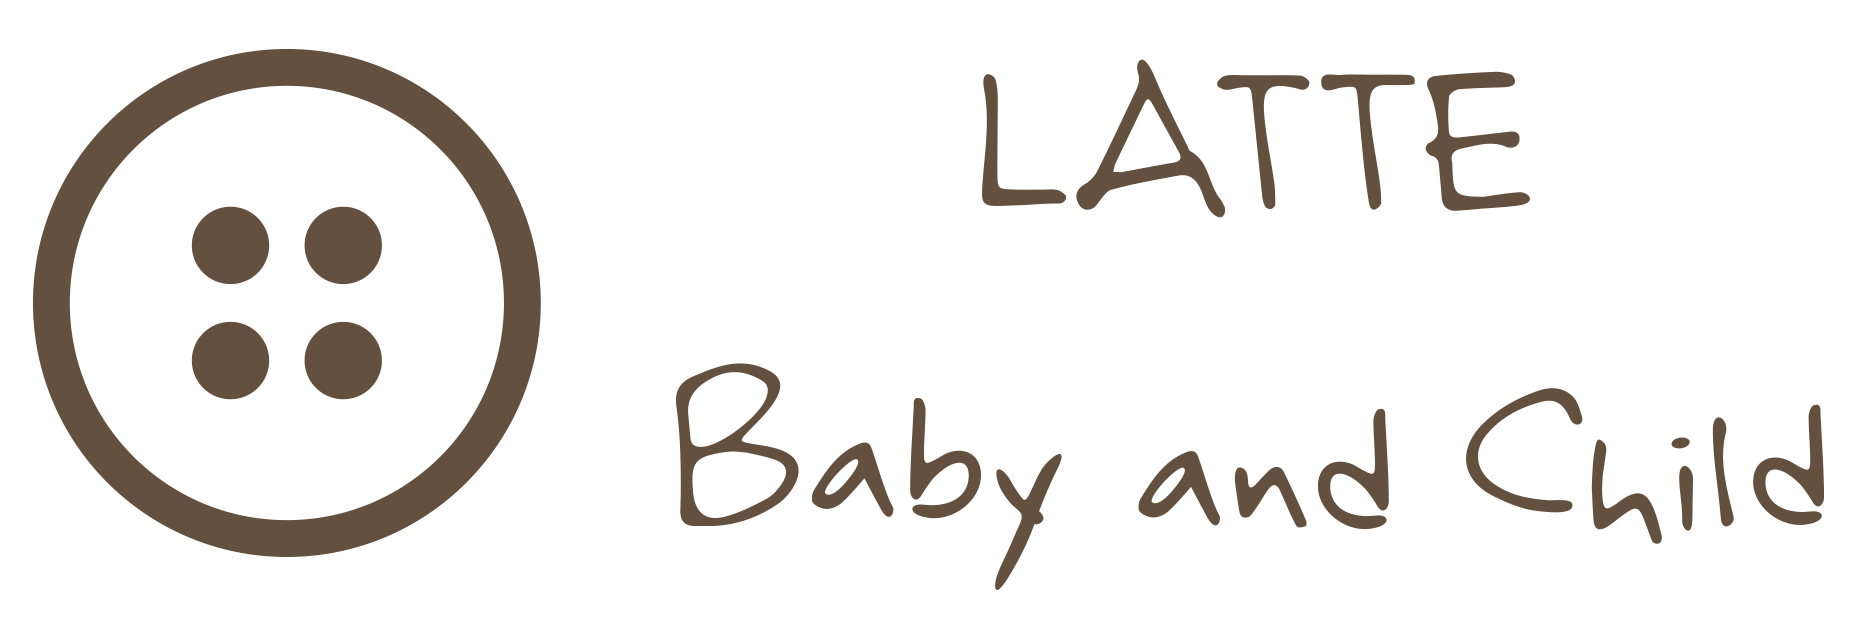 Latte Baby and Child